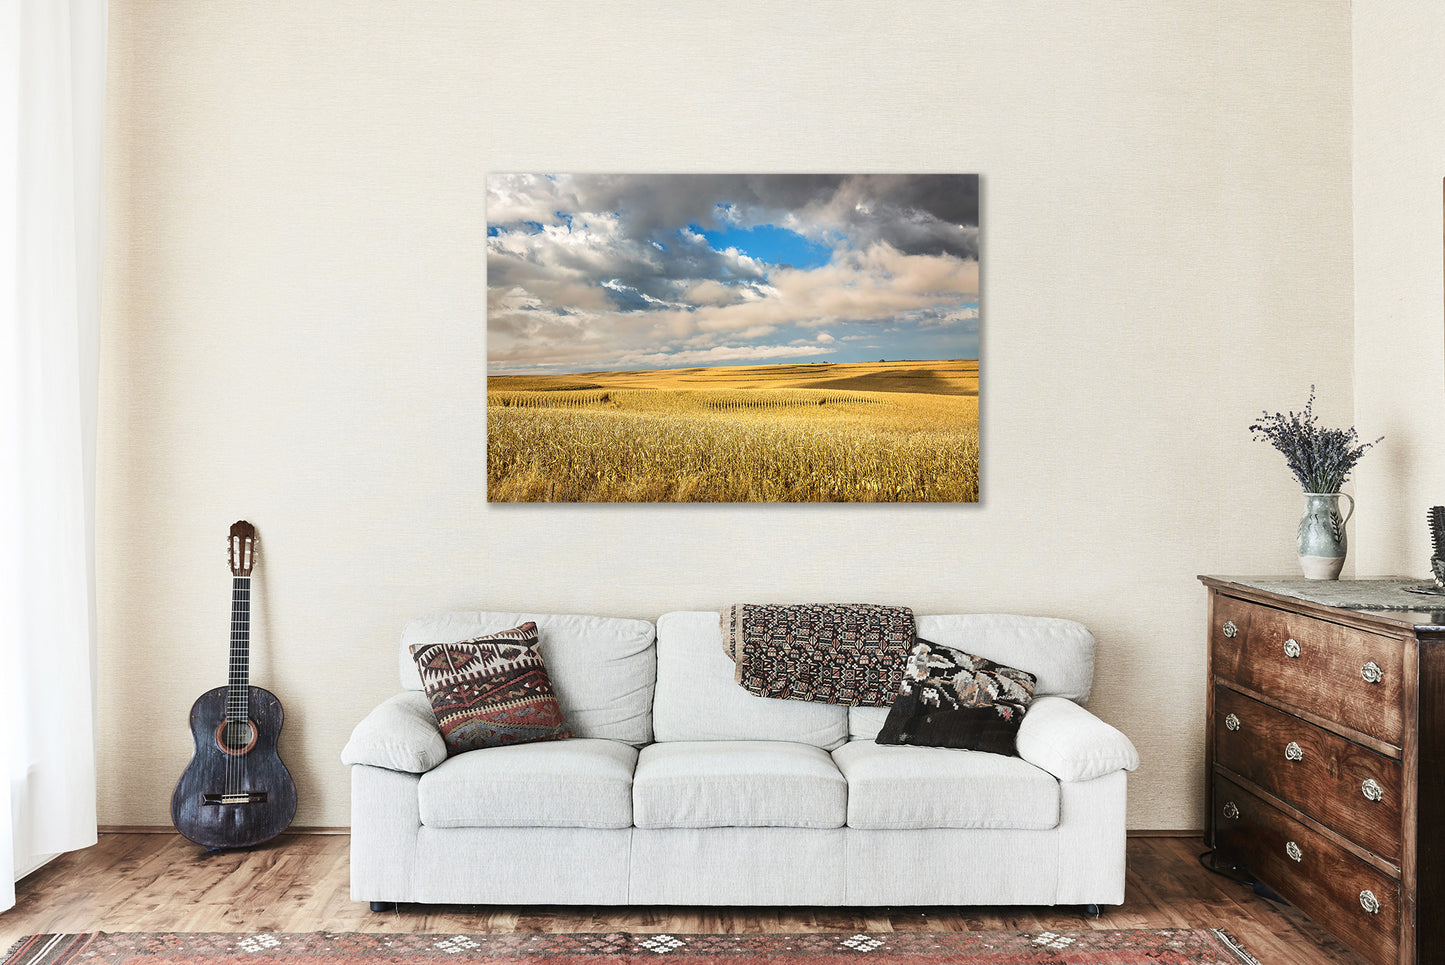 Country Metal Print - Photo of Golden Terraced Corn Field on Autumn Day in Iowa on Aluminum Midwestern Wall Art Farmhouse Decor